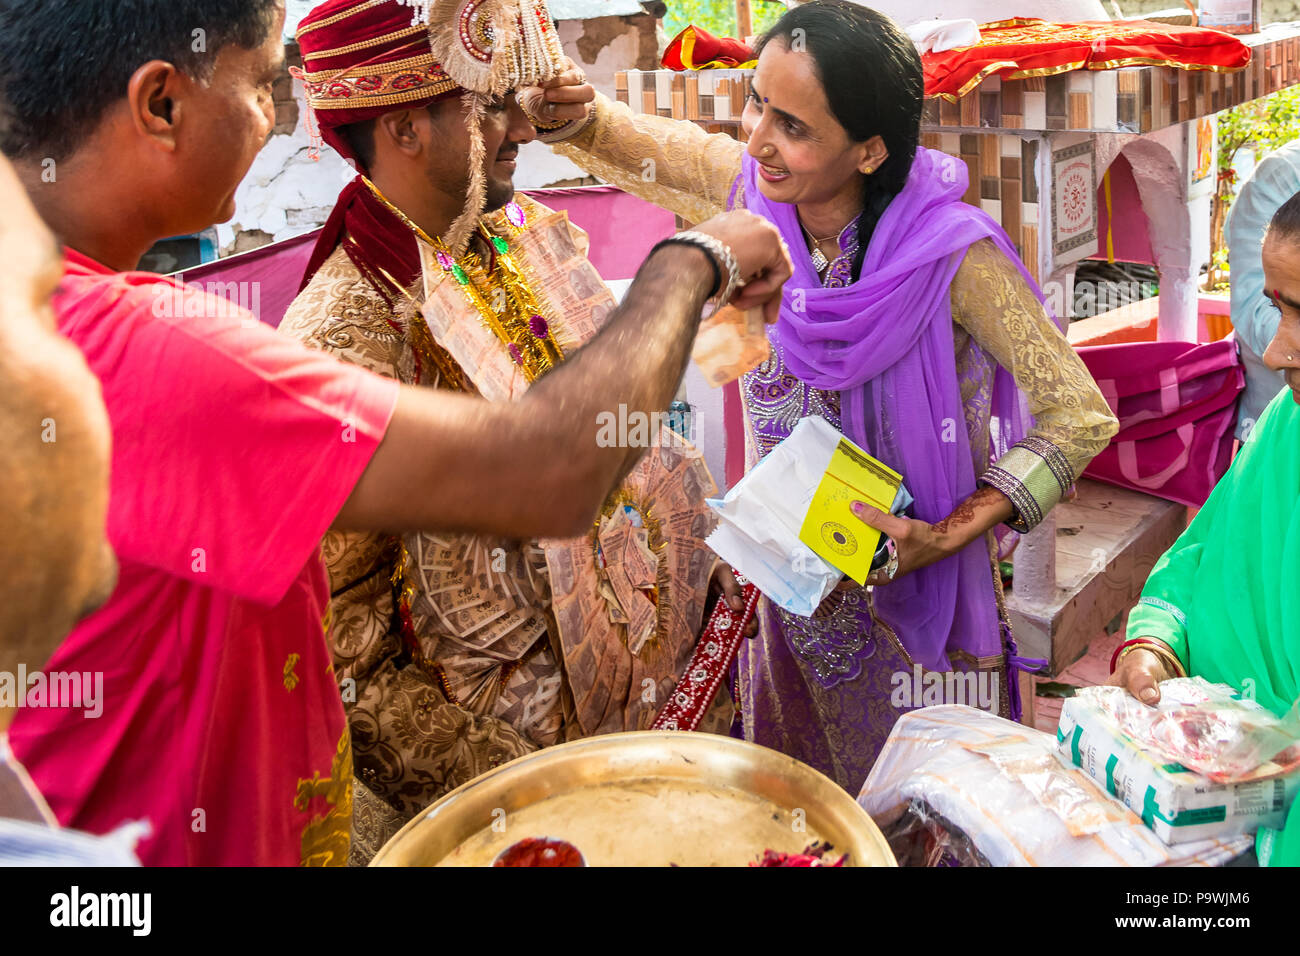 A traditional wedding in the Indian province.The groom accepts gifts,wishes and blessings from his family and guests. India June 2018 Stock Photo